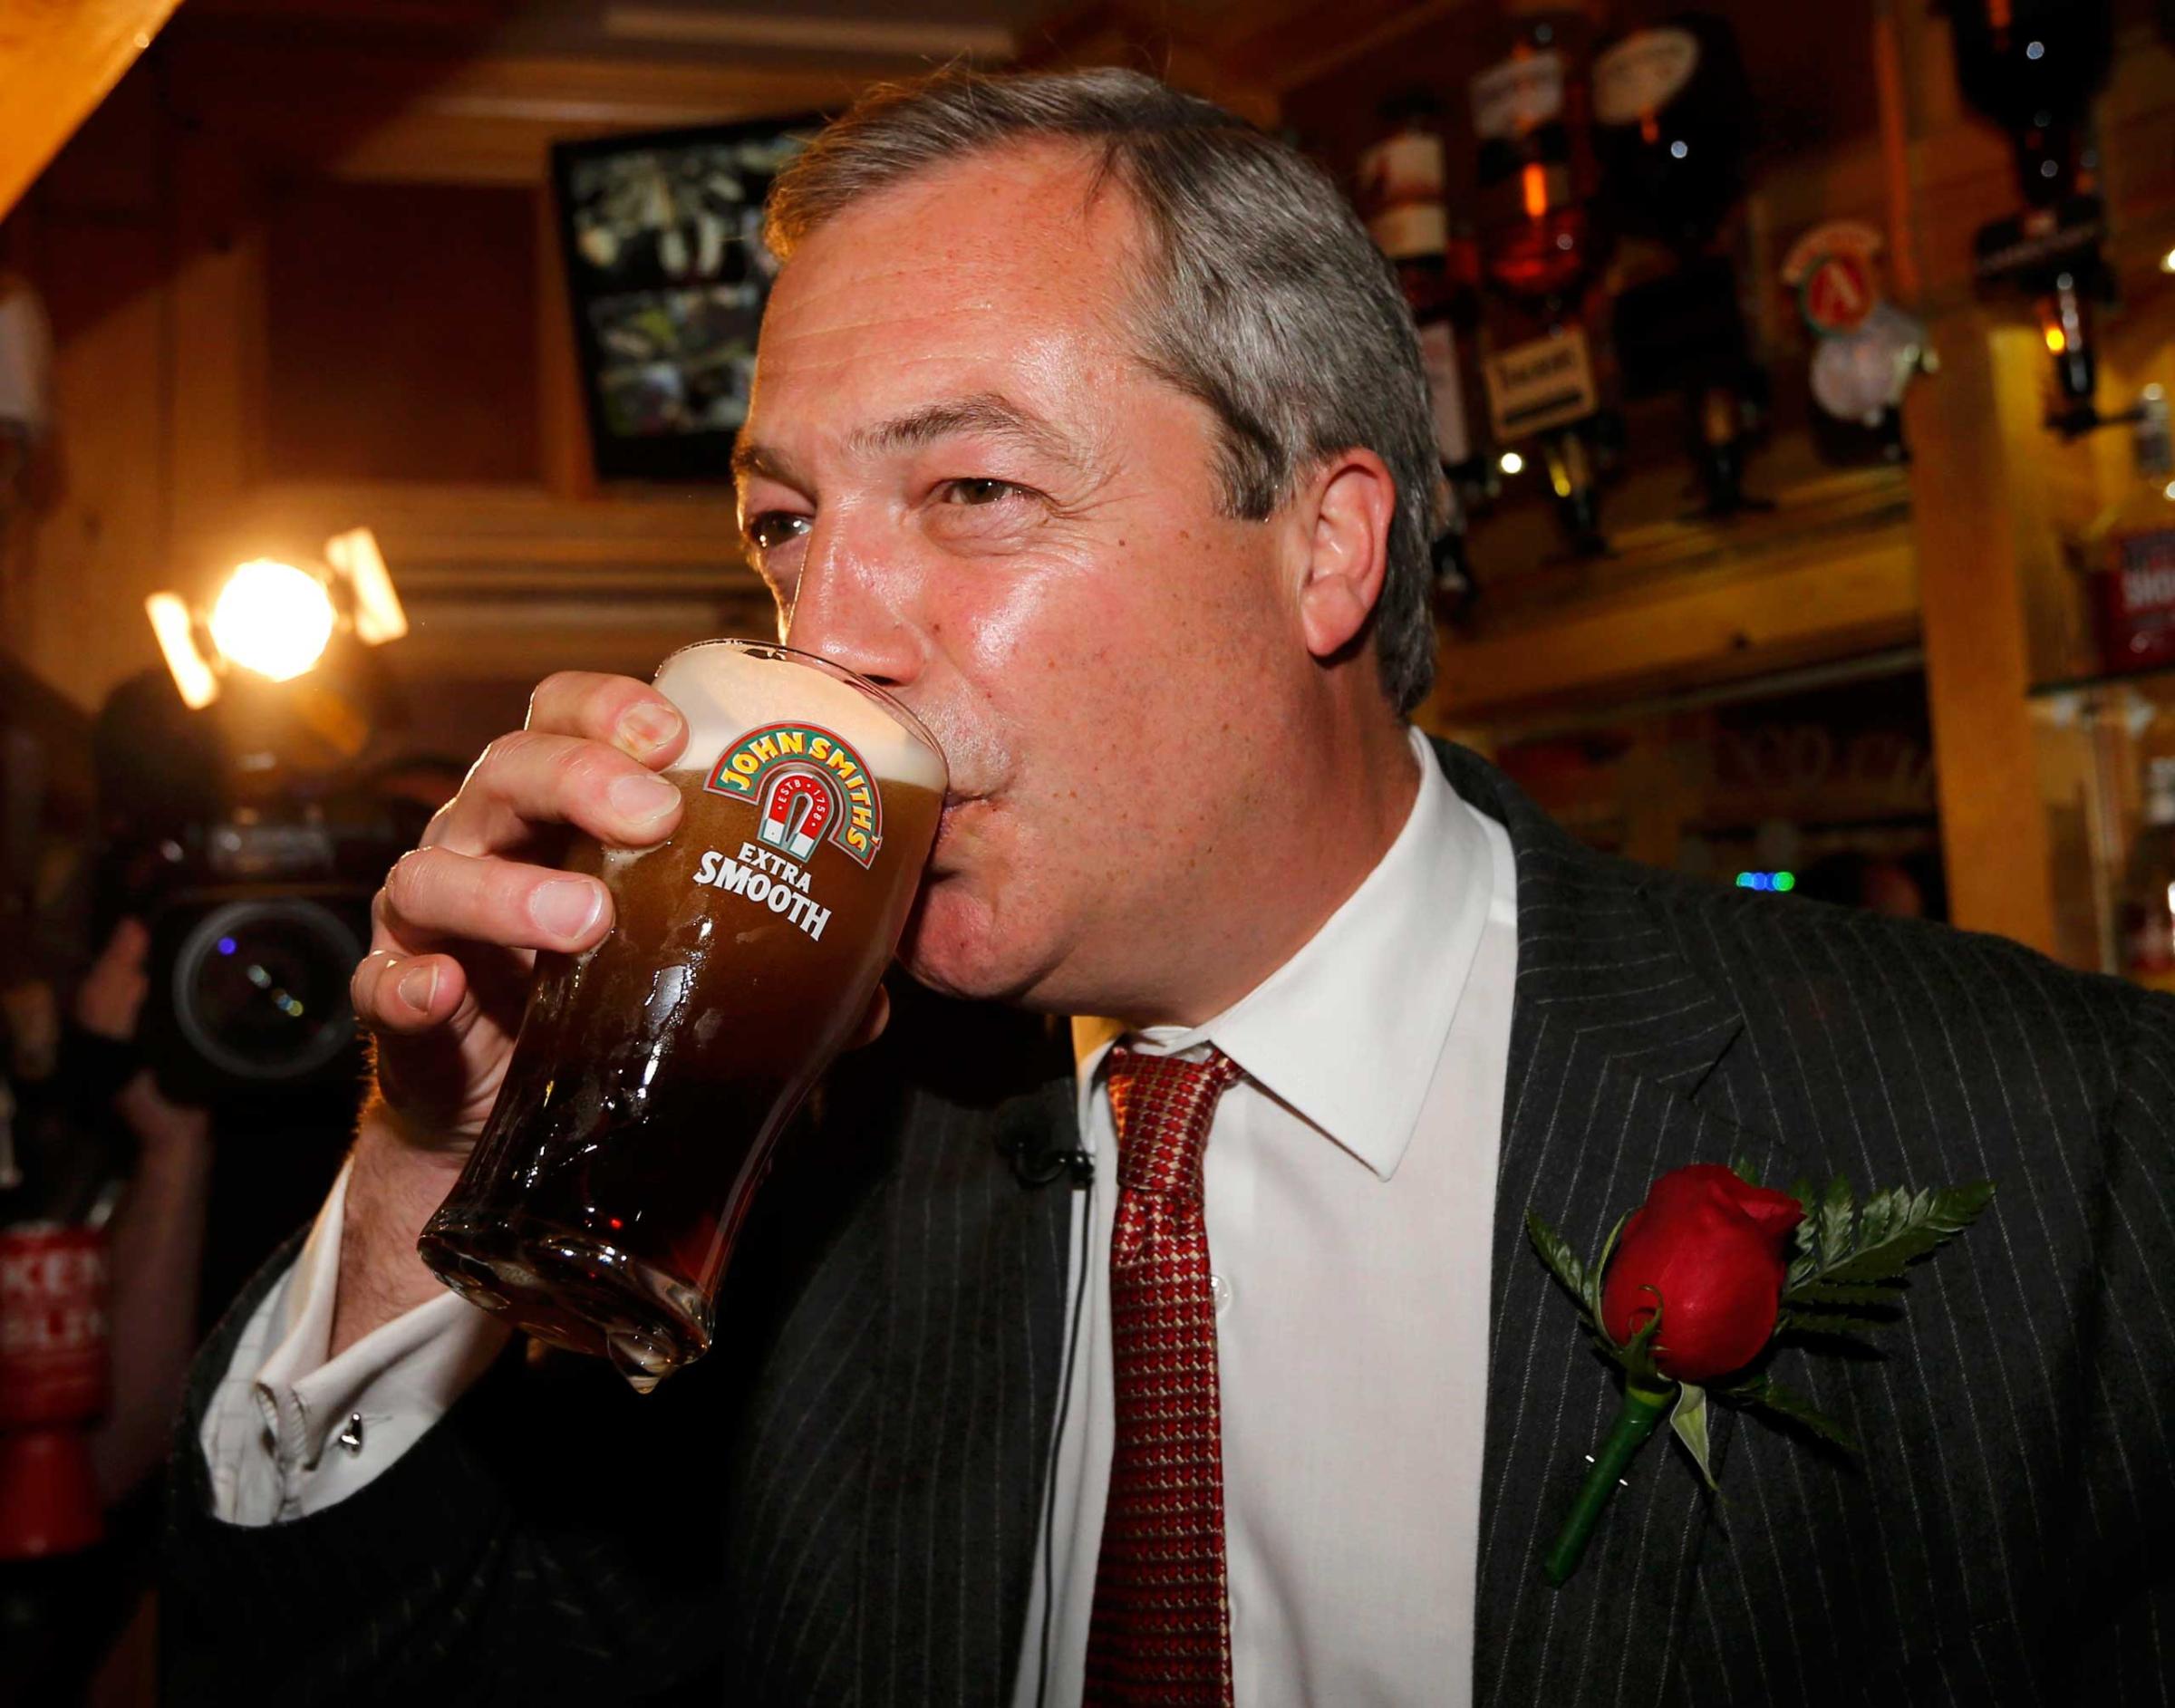 Nigel Farage enjoys a pint of beer during a visit to mark St George's day at the Northwood Club in Ramsgate, southern England on April 23, 2015.